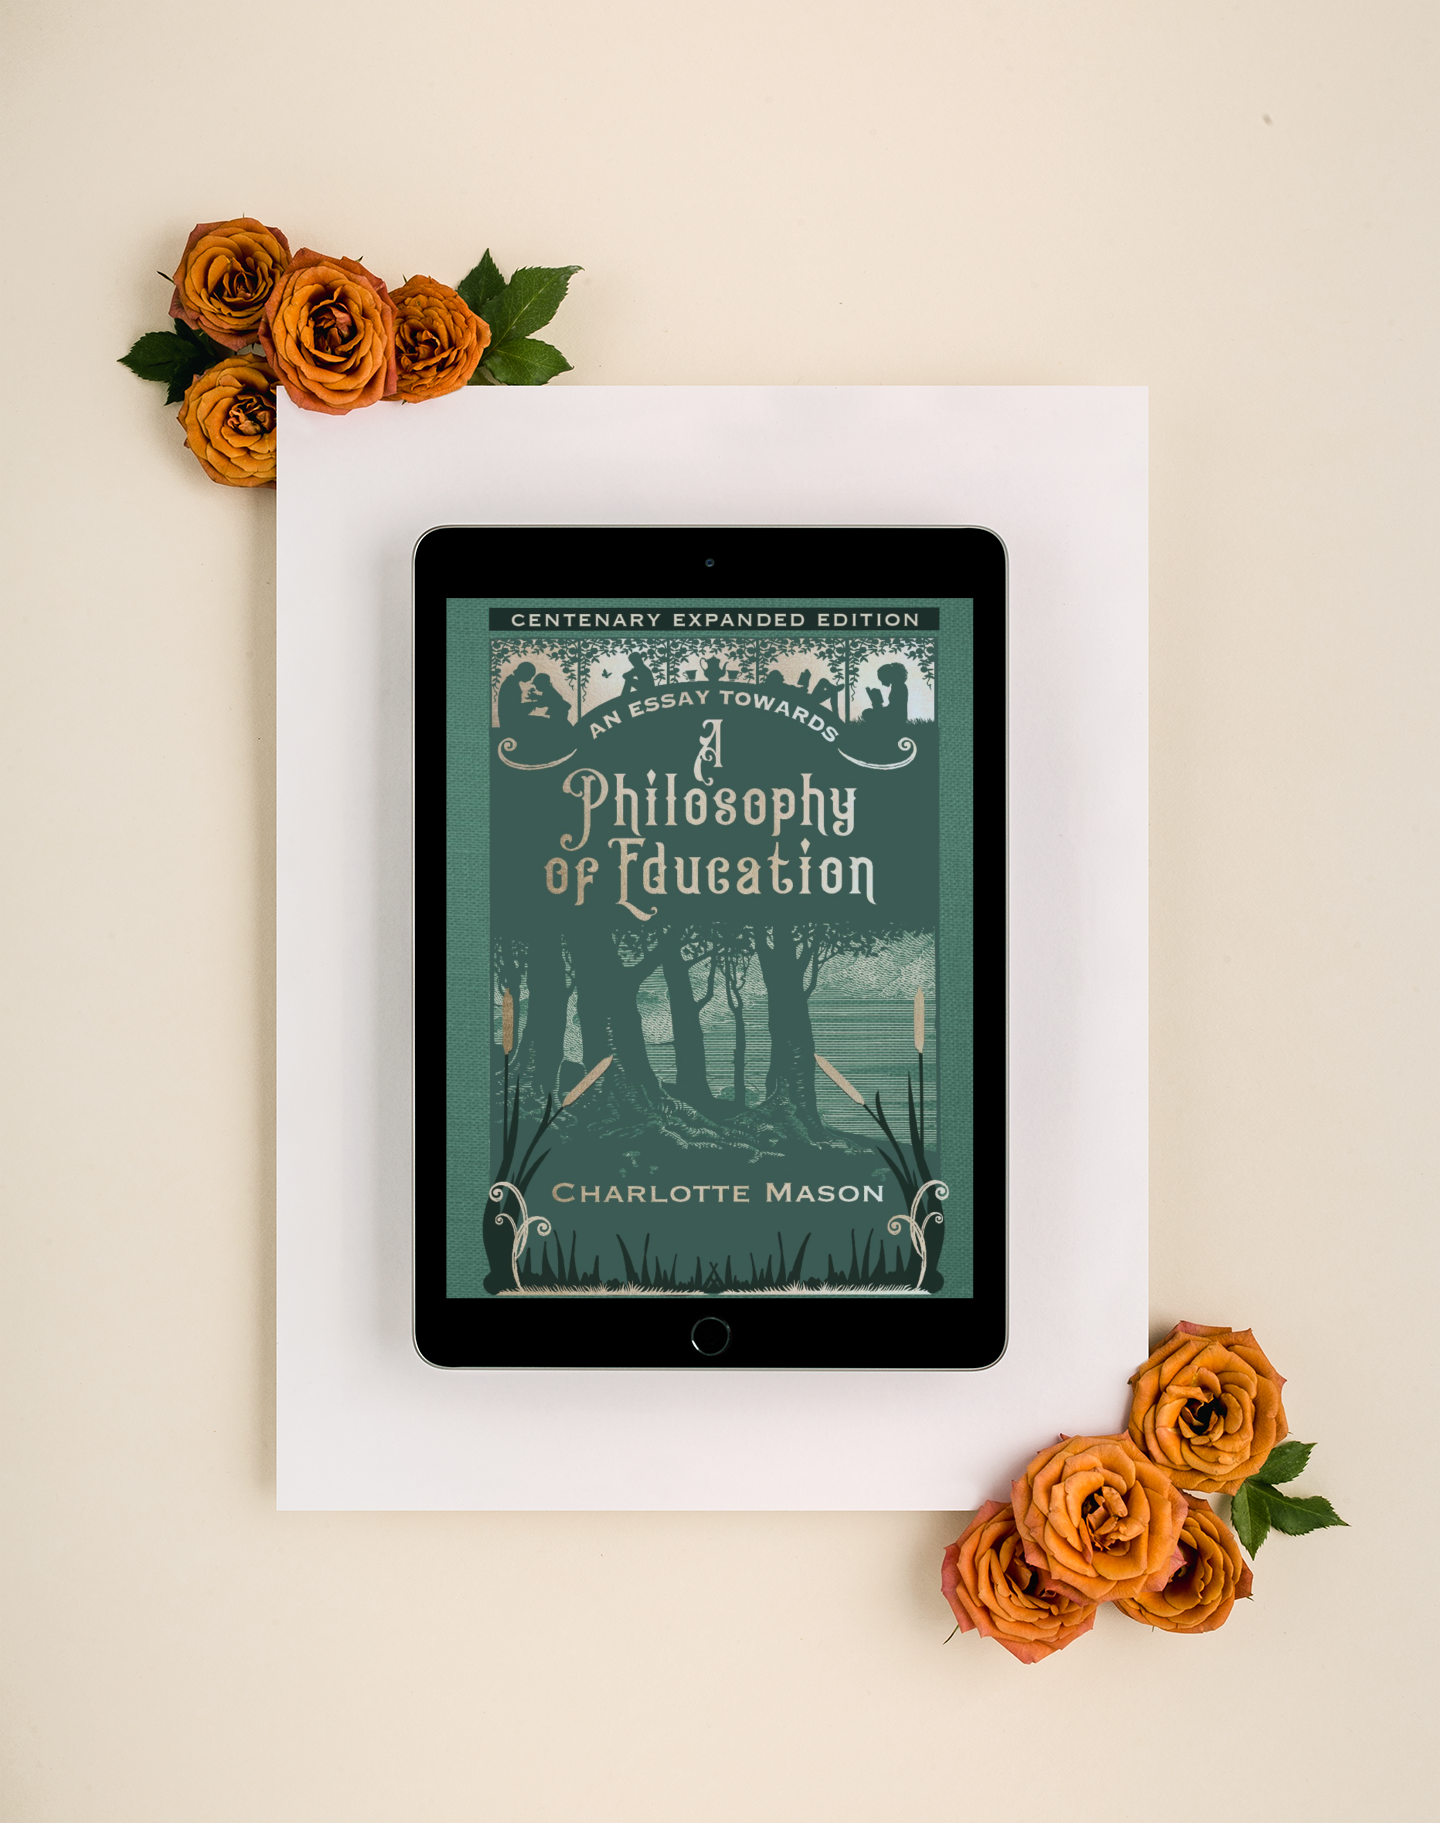 Tangerine colored roses crown the corners of a white page on which rests a tablet with the green ebook  "An Essay Towards a Philosophy of Education".